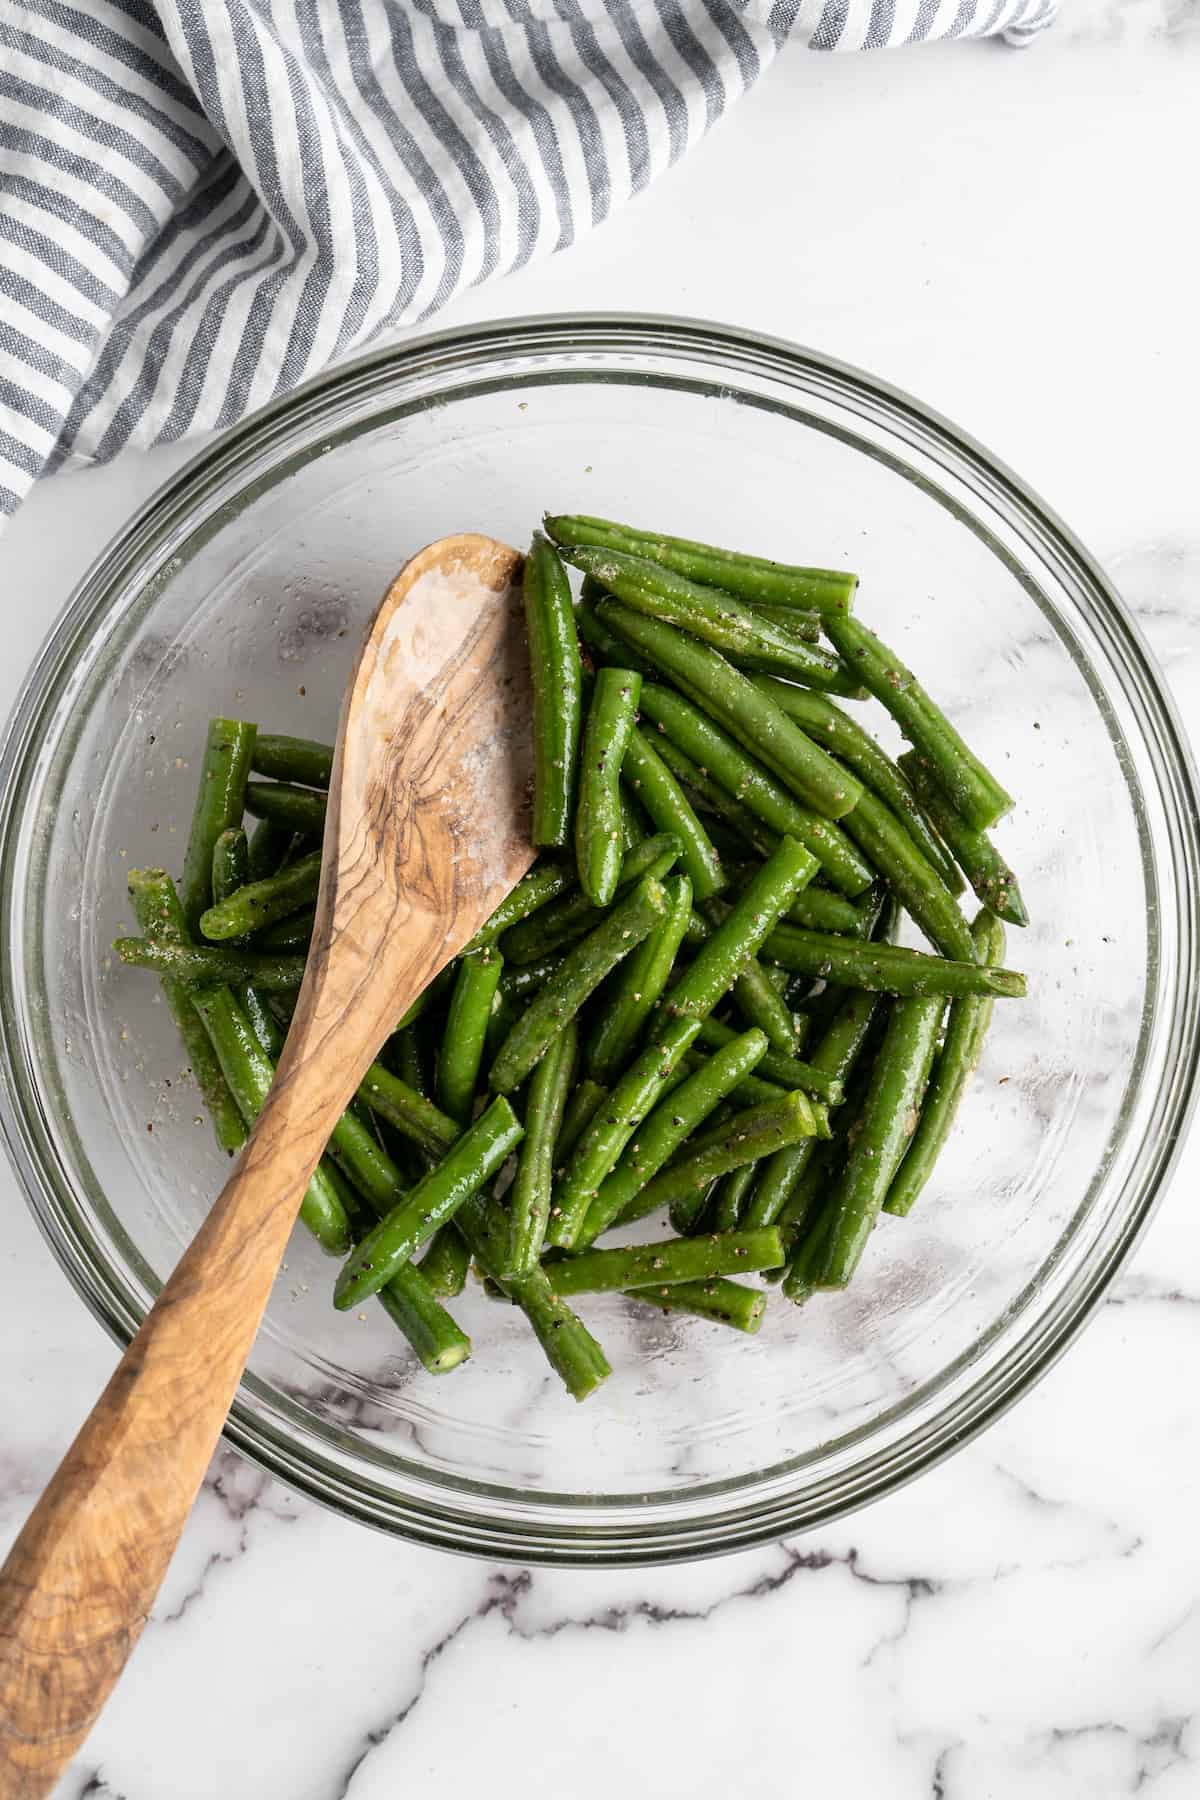 Green beans in glass bowl with wooden spoon